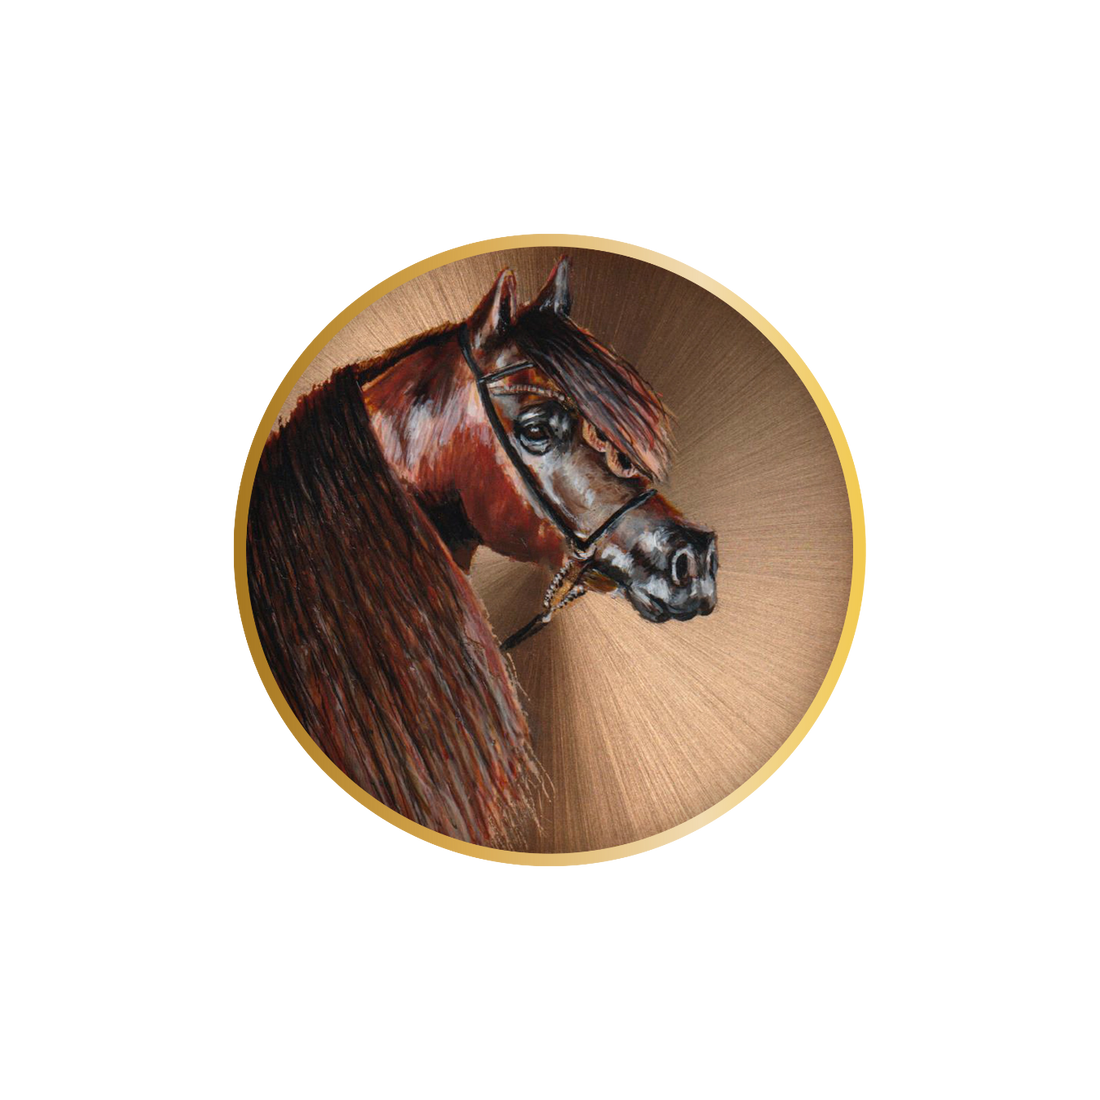 Hand-drawn portrait of "Amber," a brown Arabian horse, part of a distinguished collection, captured with intricate details